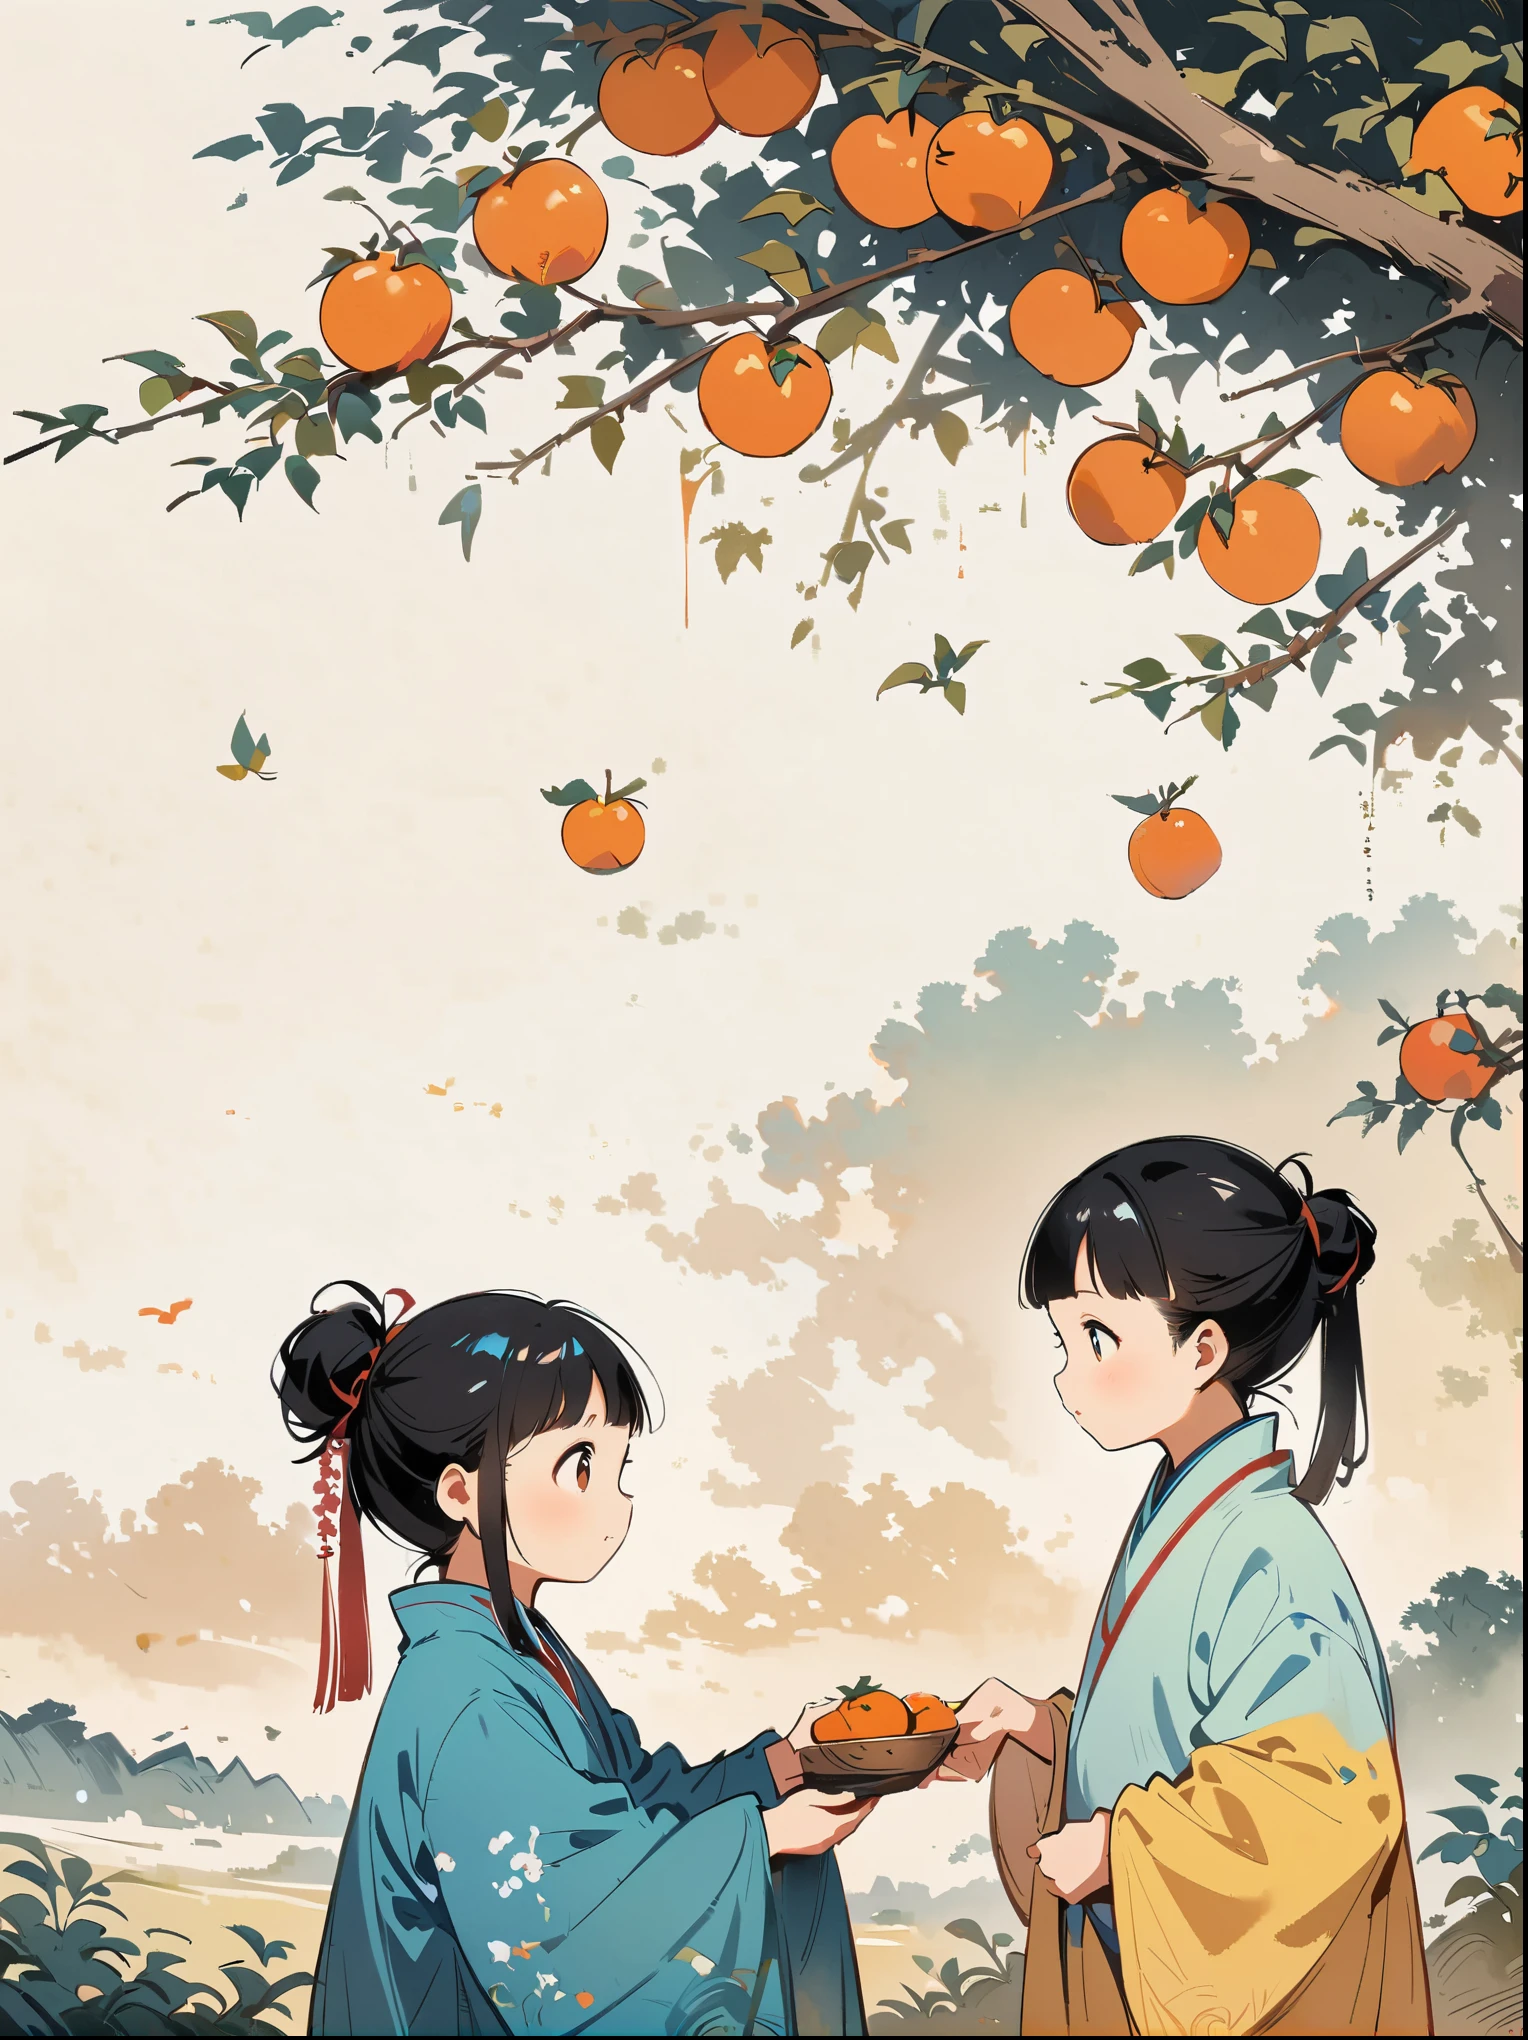 (A group of children picking persimmons under a persimmon tree), Jiangnan countryside, Chinese children's book illustration, (in the style of Feng Zikai), minimalism, line art, (ink and yellow colors), white background